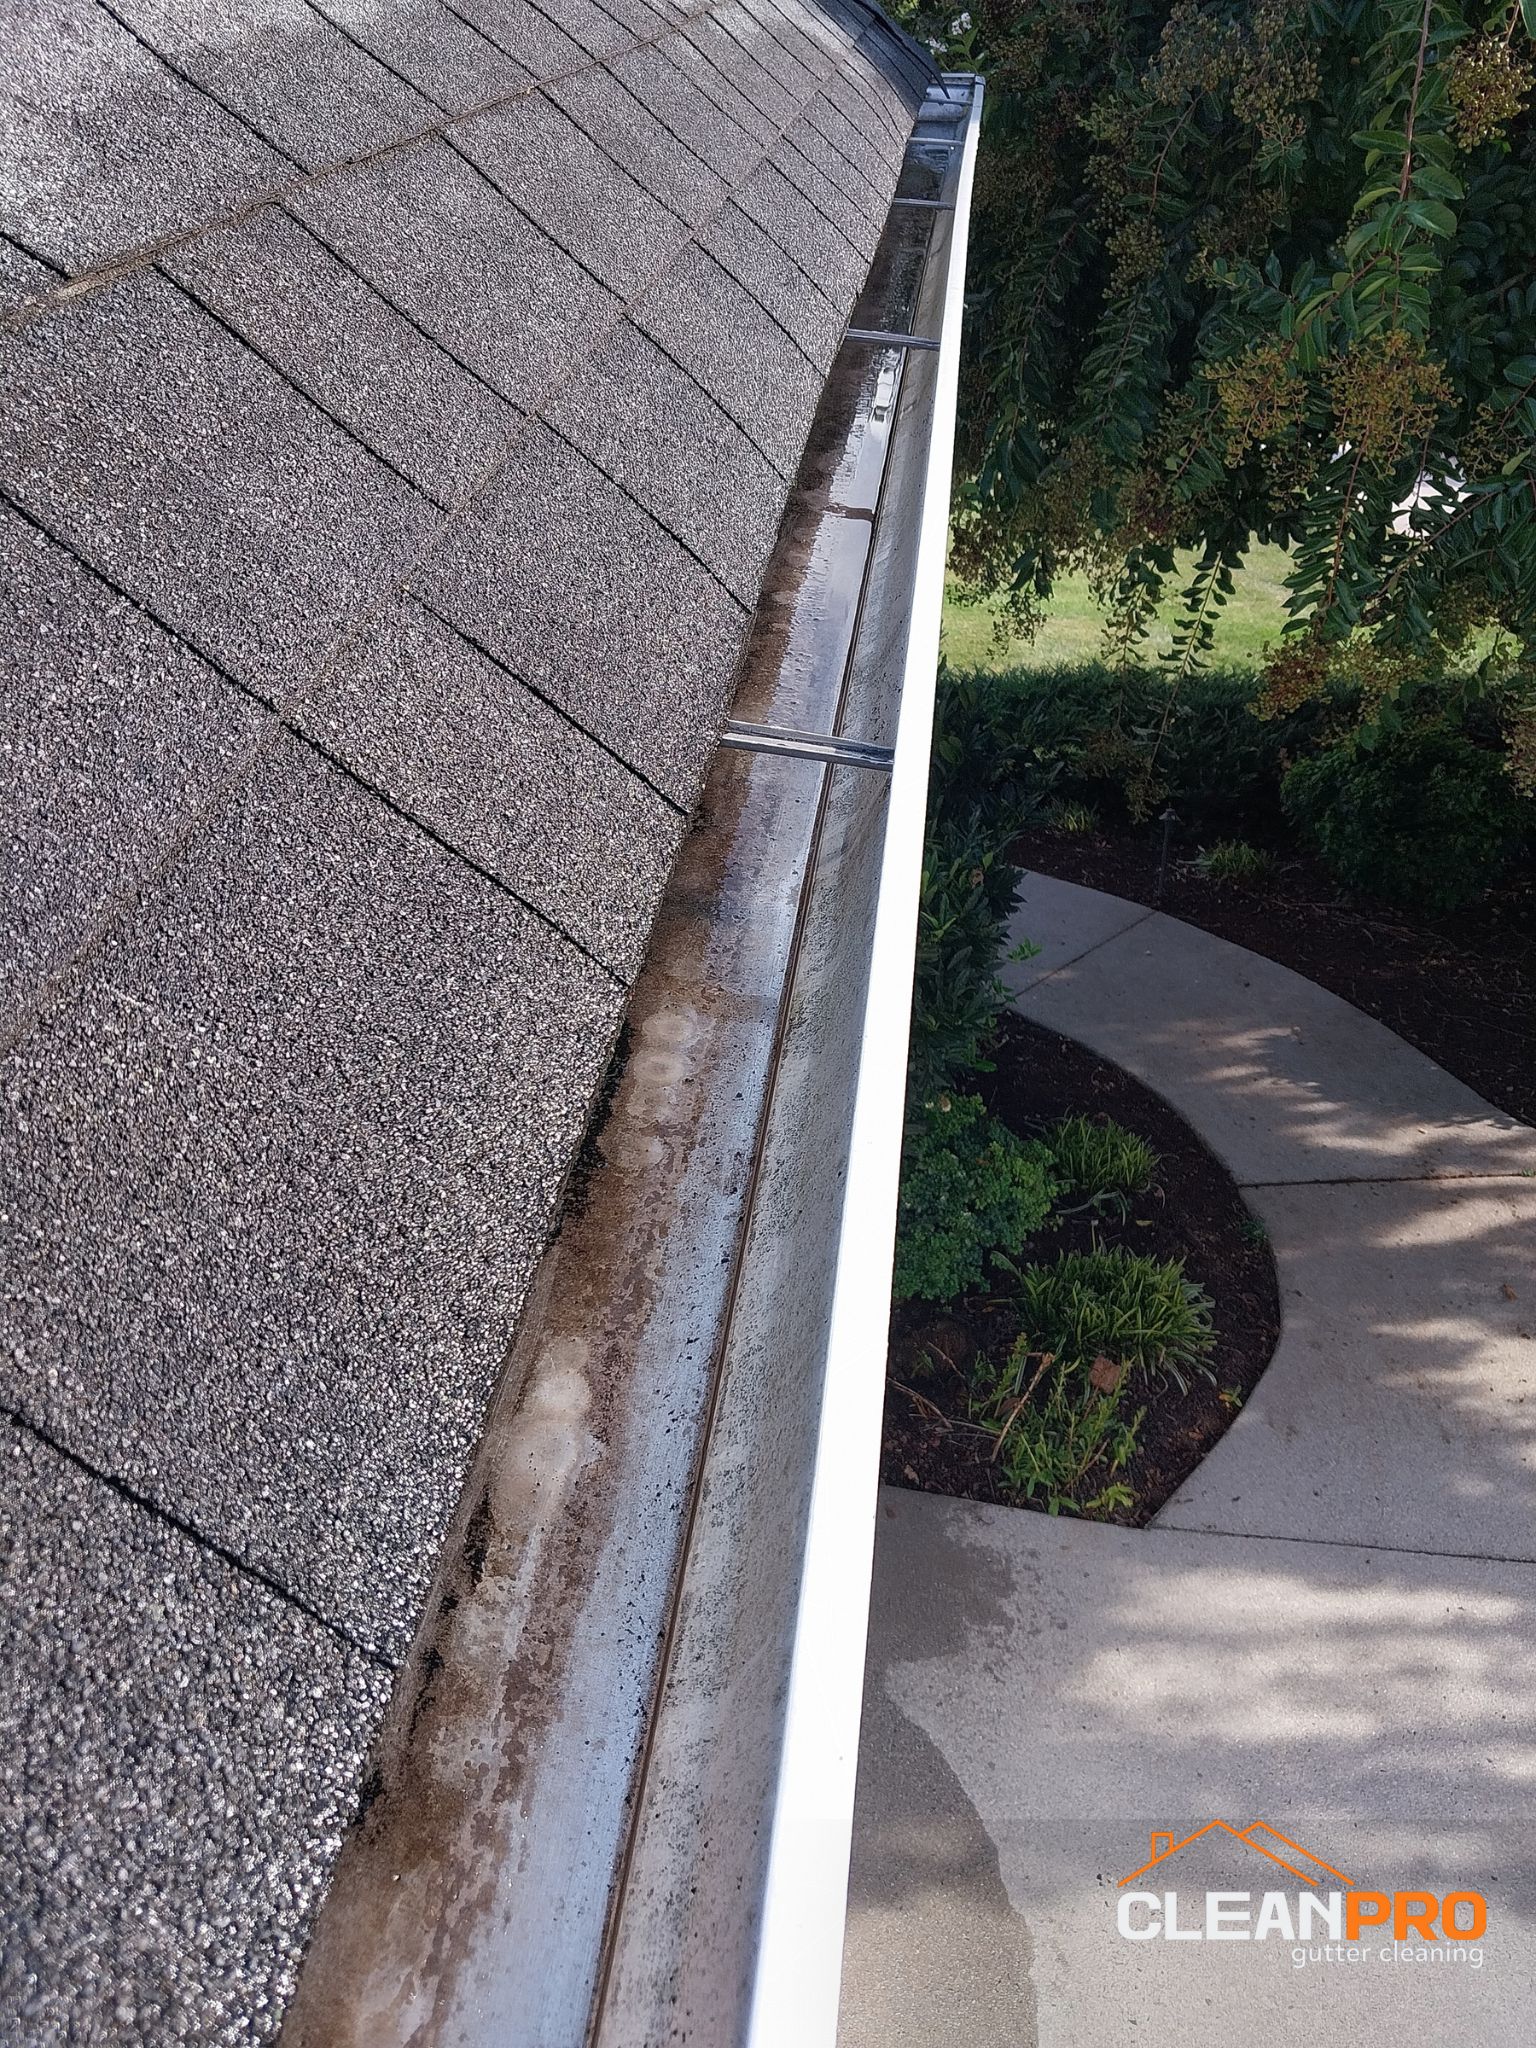 Local Gutter Cleaning in Newport News